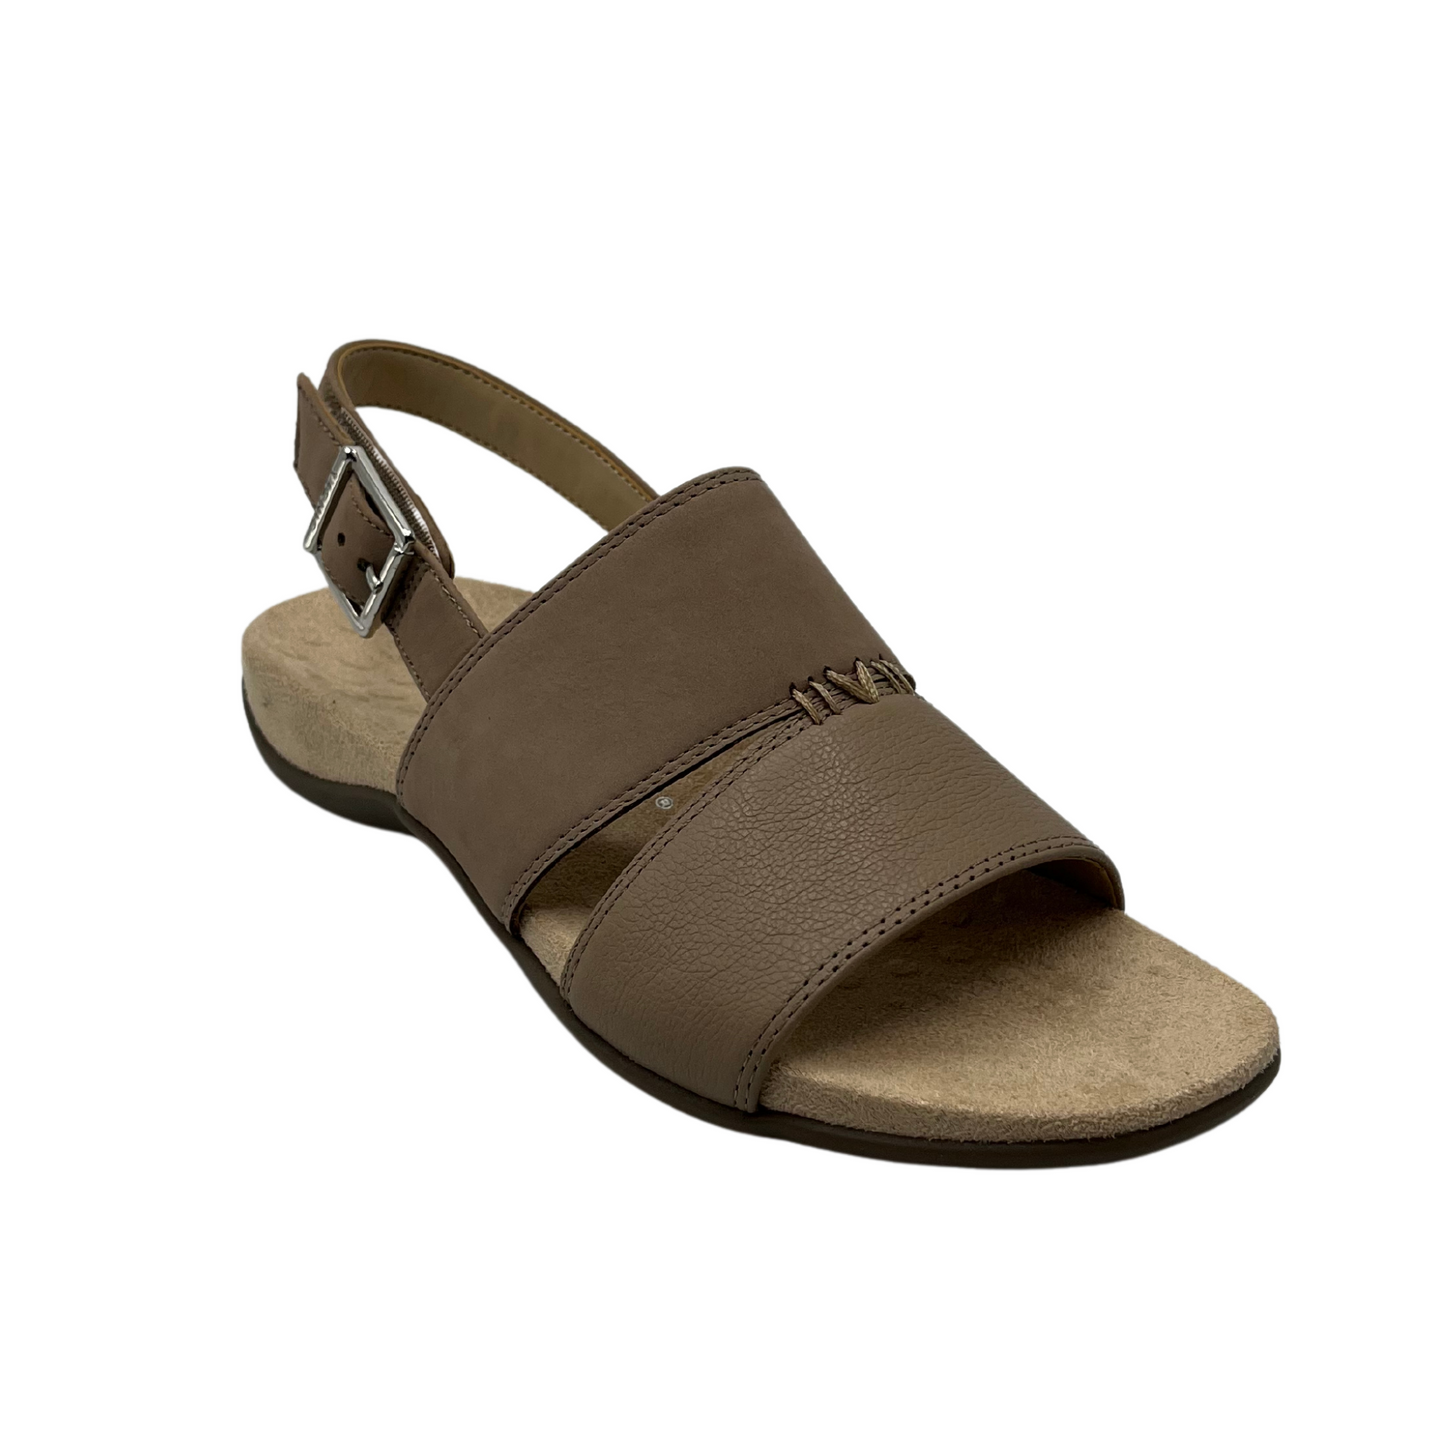 45 degree angled view of brown leather sandal with microfibre footbed and rubber outsole